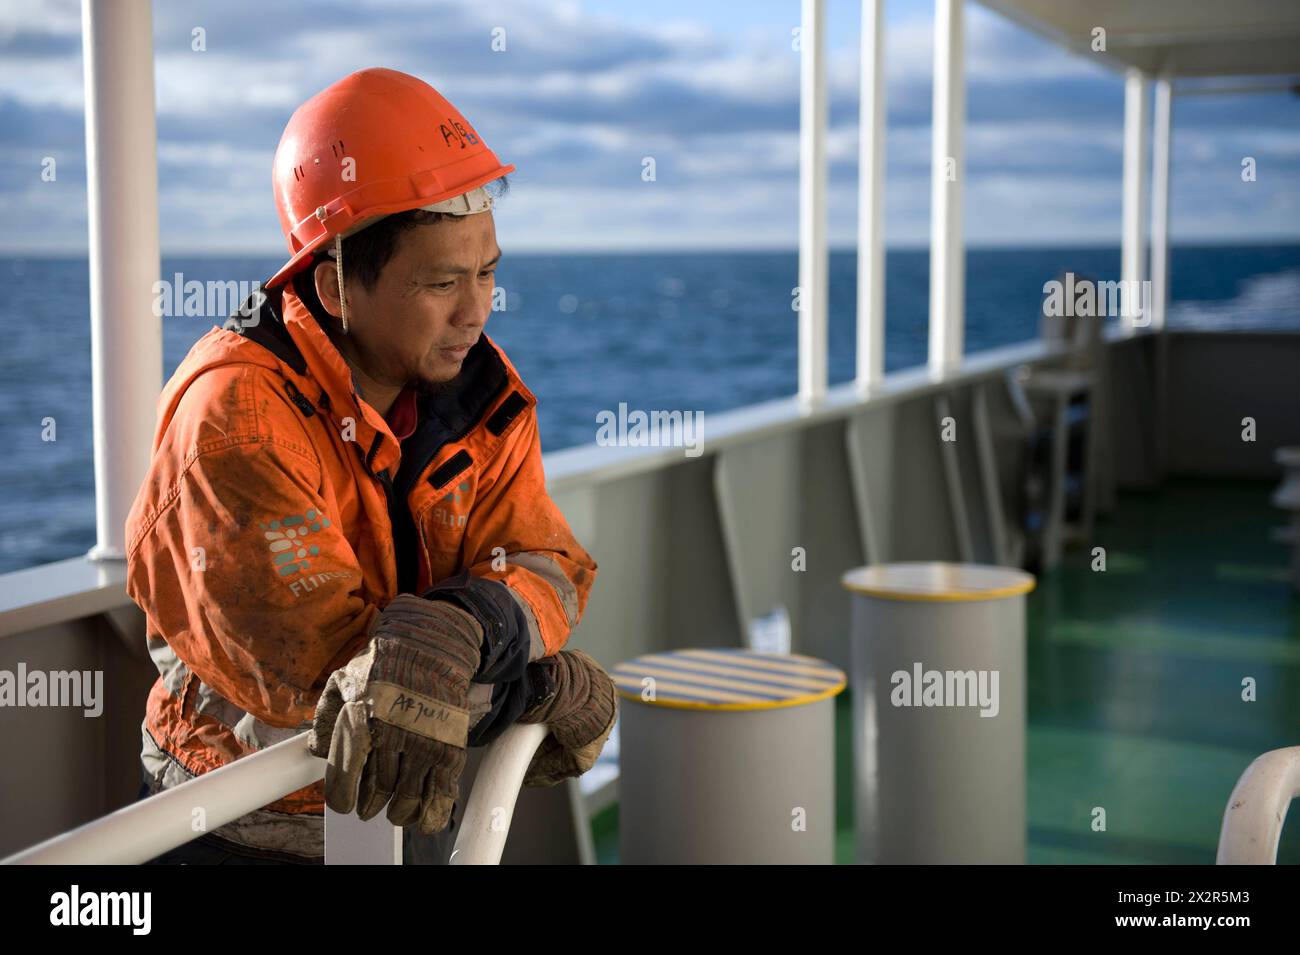 Able Seasman on Deck Able Seaman from the Philippines on Deck of Container Vessel MS Flintercape during a voyage from Port of Rotterdam Harbour towards the Docks of Sundsvall, Sweden. MRYES Rotterdam NLD - Sundsvall SE Containervessel MS Flintercape Noordzee, Baltische Zee, Golf va Netherlands Copyright: xGuidoxKoppesxPhotox Stock Photo